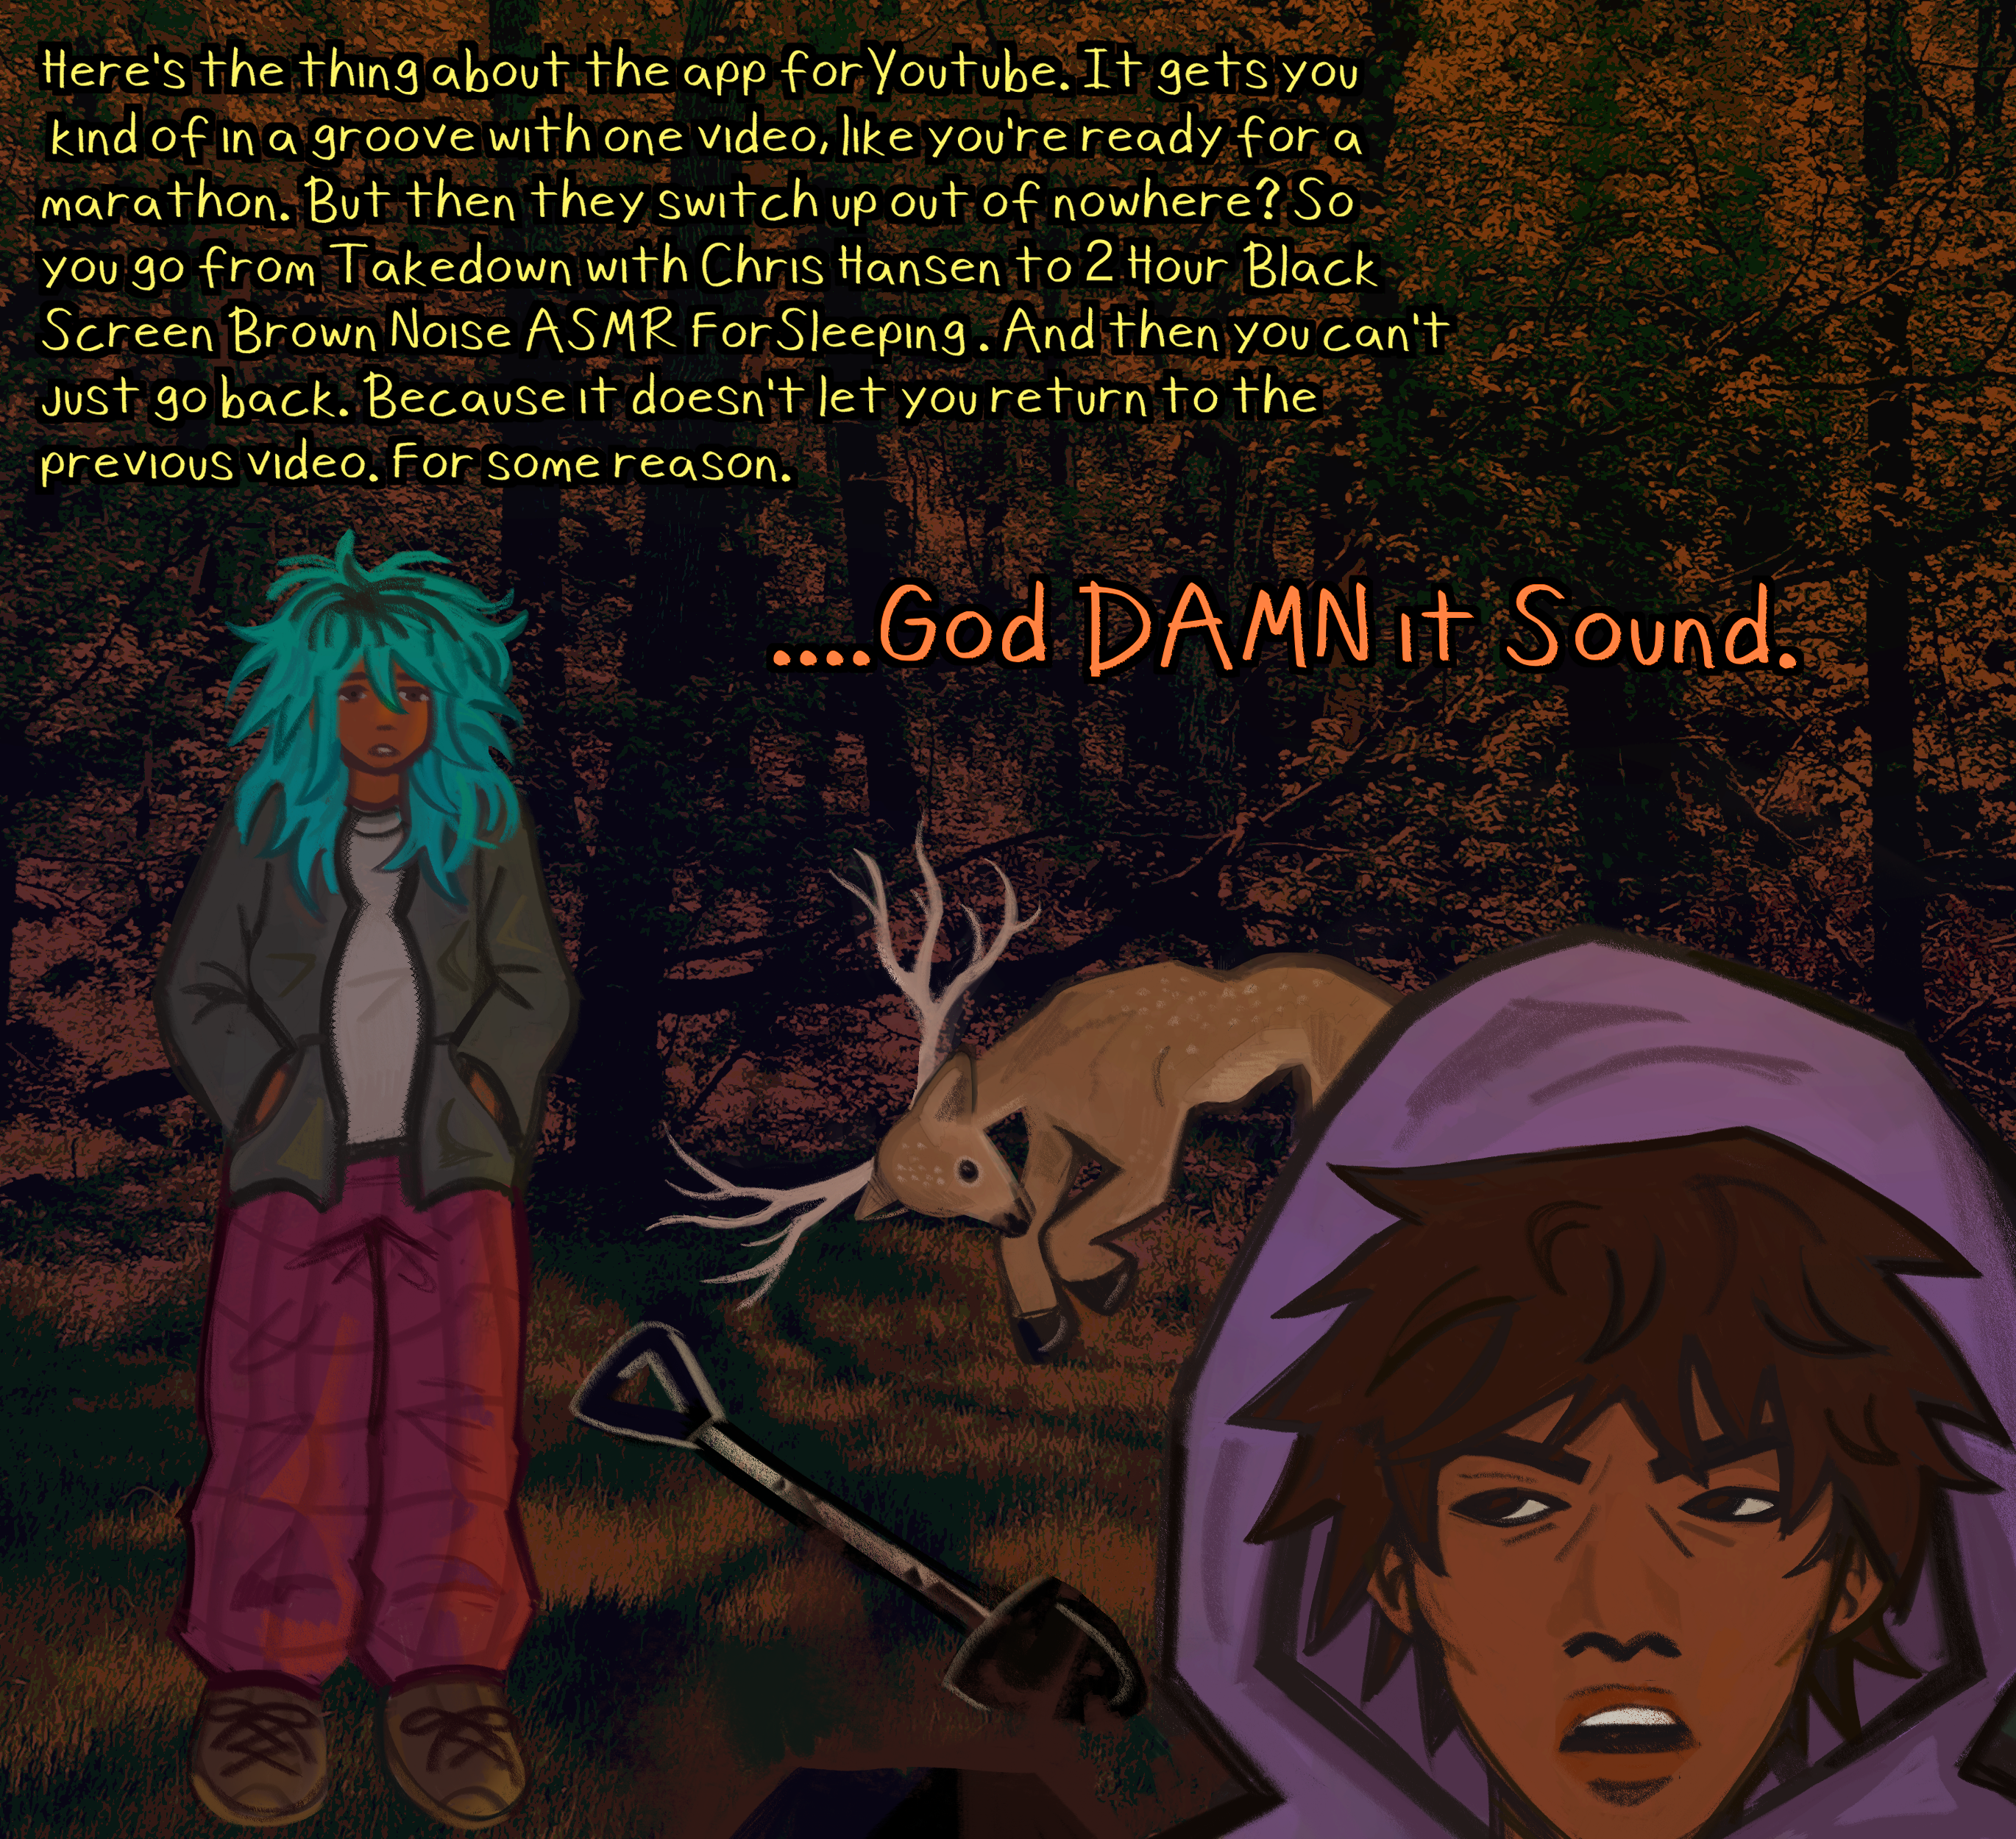 Jackal and Sound in the forest at sunset. Sound is effortlessly casual, uncombed teal-blue hair, her hands in her pockets; she slouches to survey her brother, Jackal, doing the hard work with the shovel for her. Jackal, wearing a purple sweatshirt with the hood drawn over his head, scowls with his back turned pointedly to his sister.